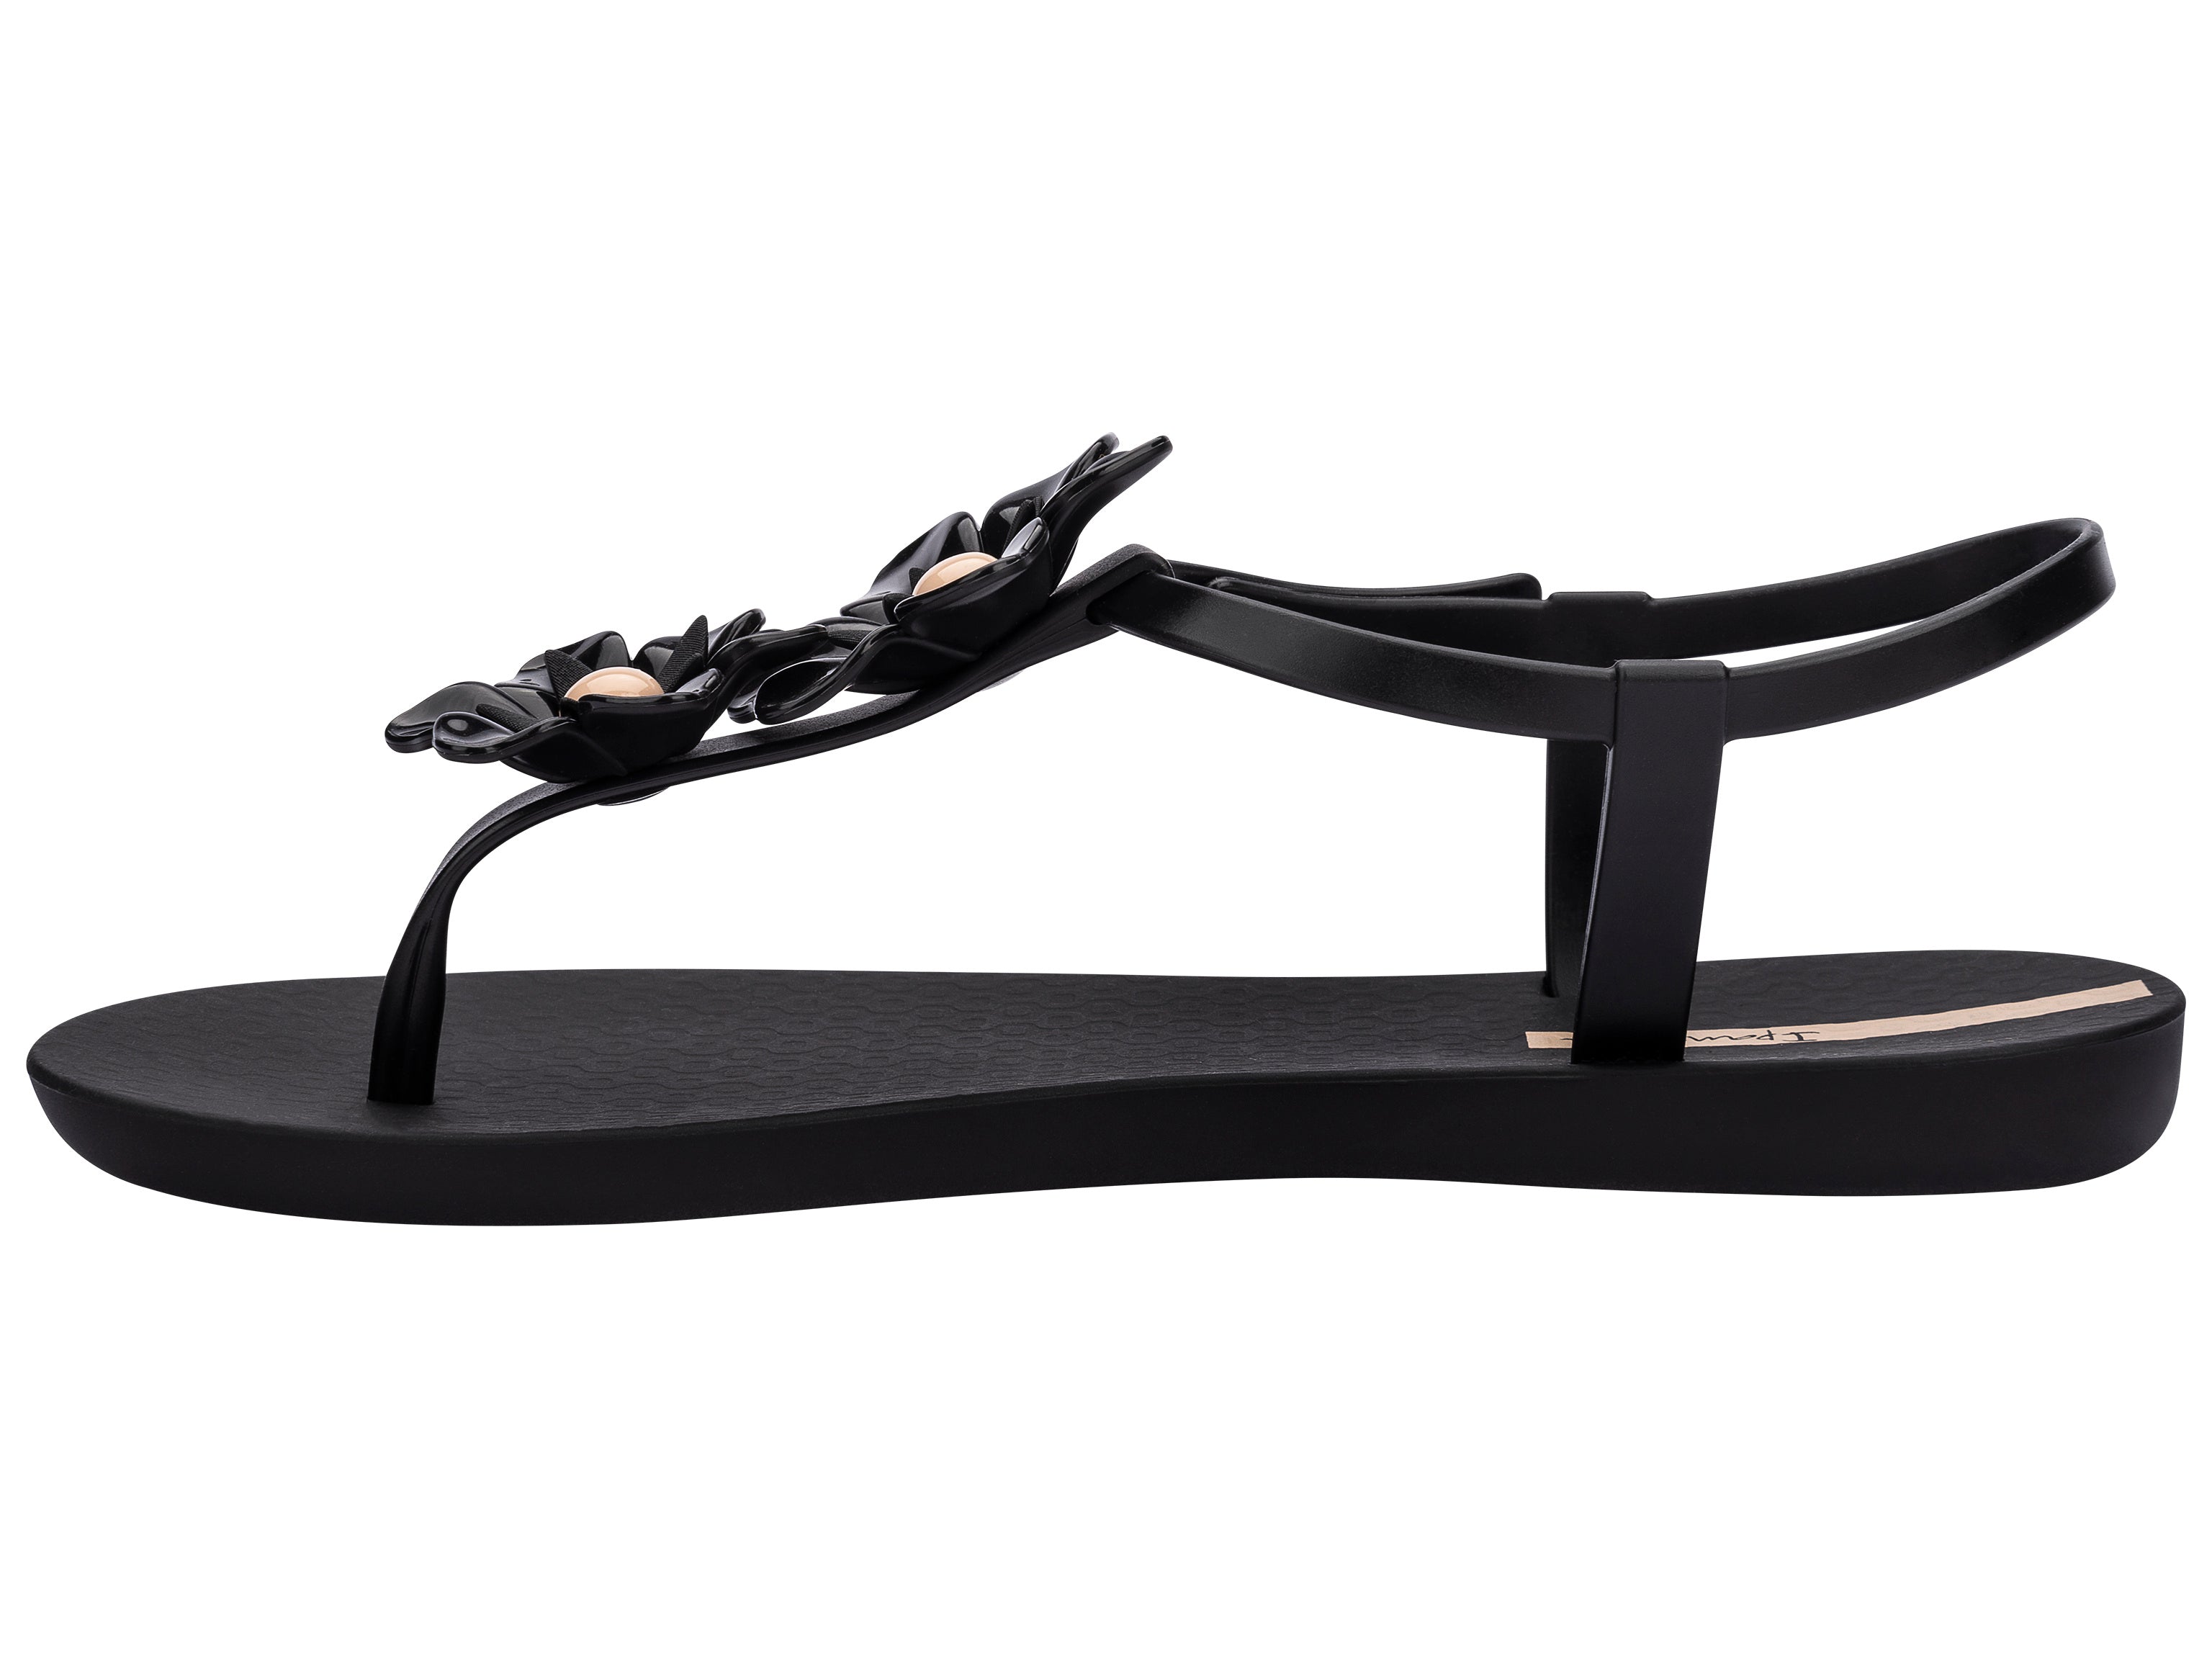 Inner side view of a black Ipanema Duo Flowers women's t-strap sandal with two flowers.